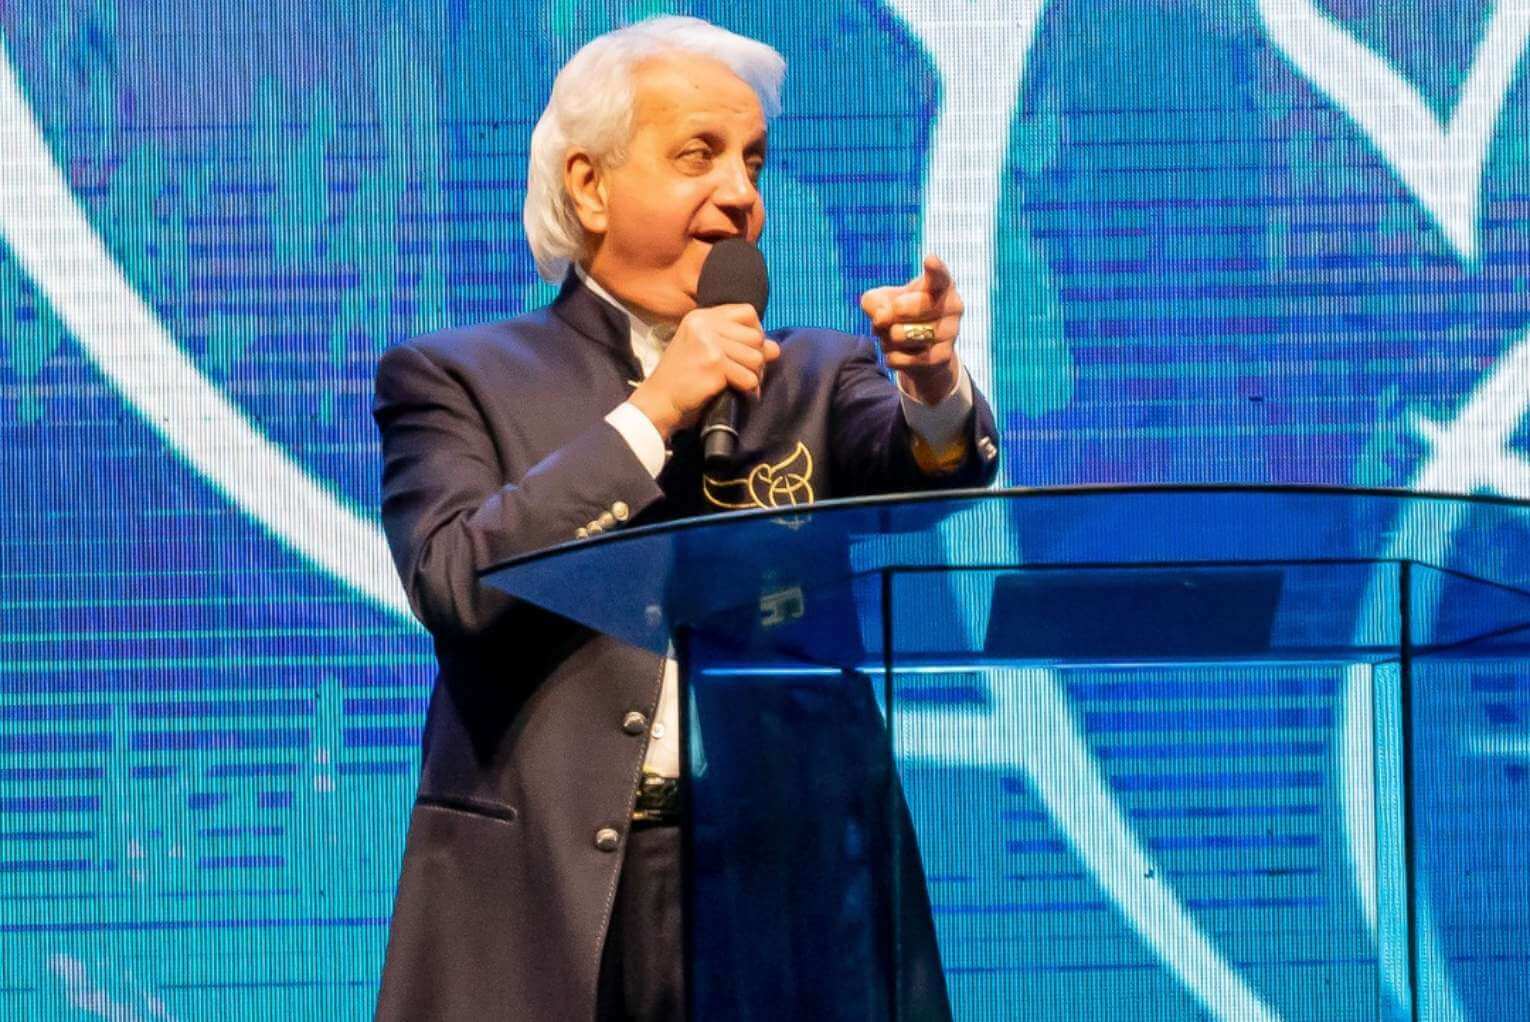 Morning Rundown: Benny Hinn Speaks Out Amid Controversy